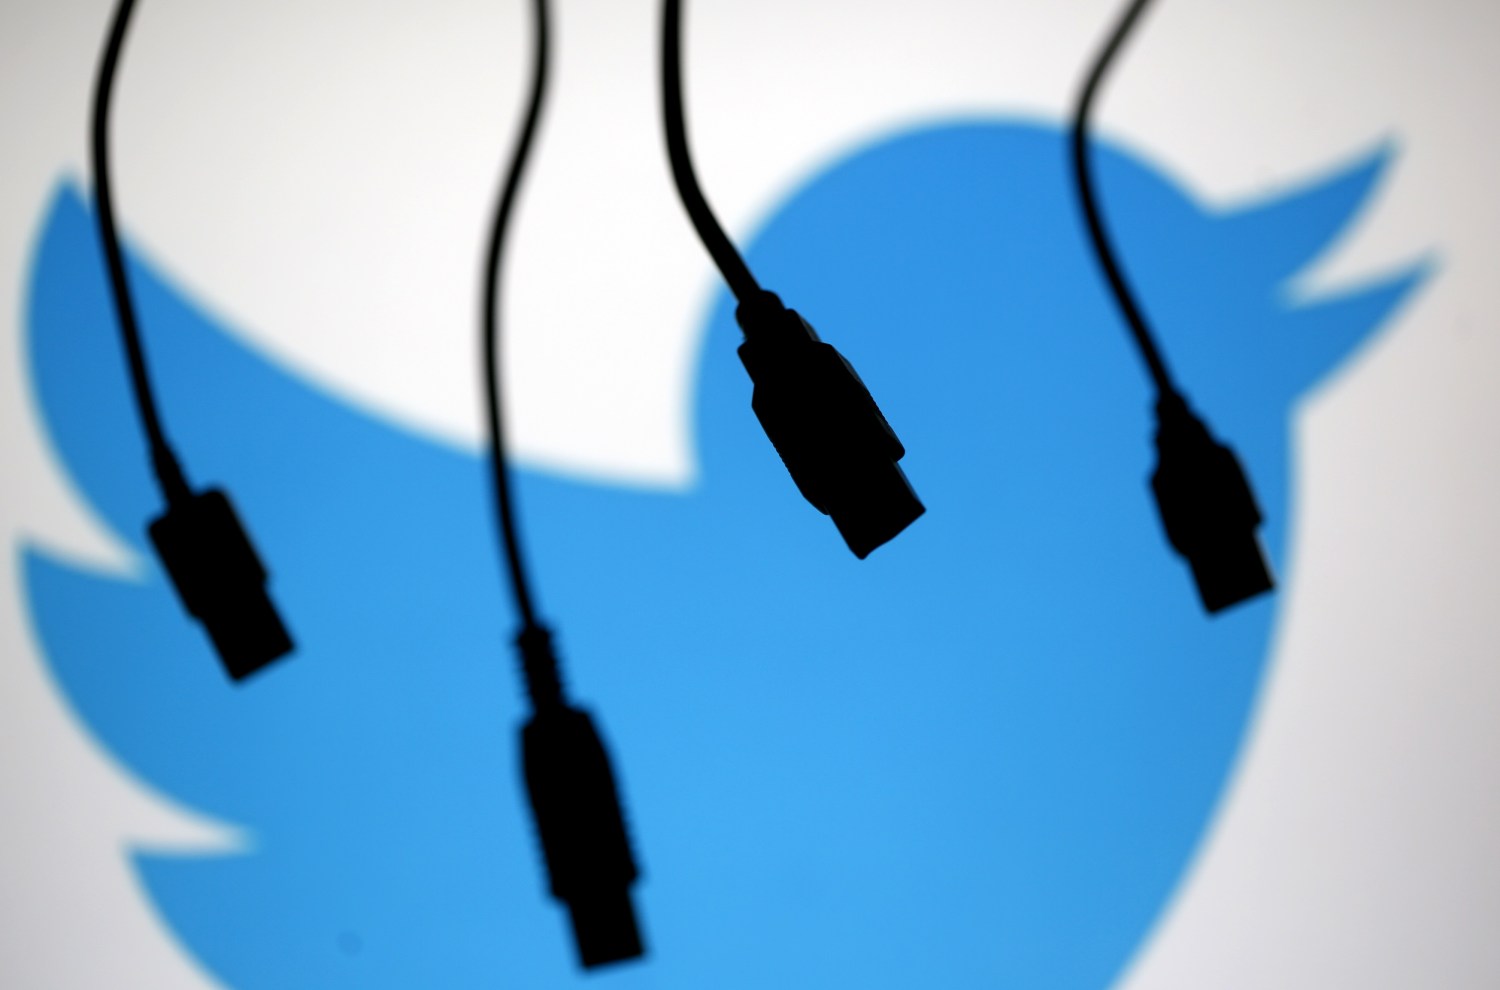 Electronic cables are silhouetted next to the logo of Twitter in this September 23, 2014 illustration photo in Sarajevo.   REUTERS/Dado Ruvic (BOSNIA AND HERZEGOVINA  - Tags: BUSINESS TELECOMS)   - LR1EA9O0V2XEA